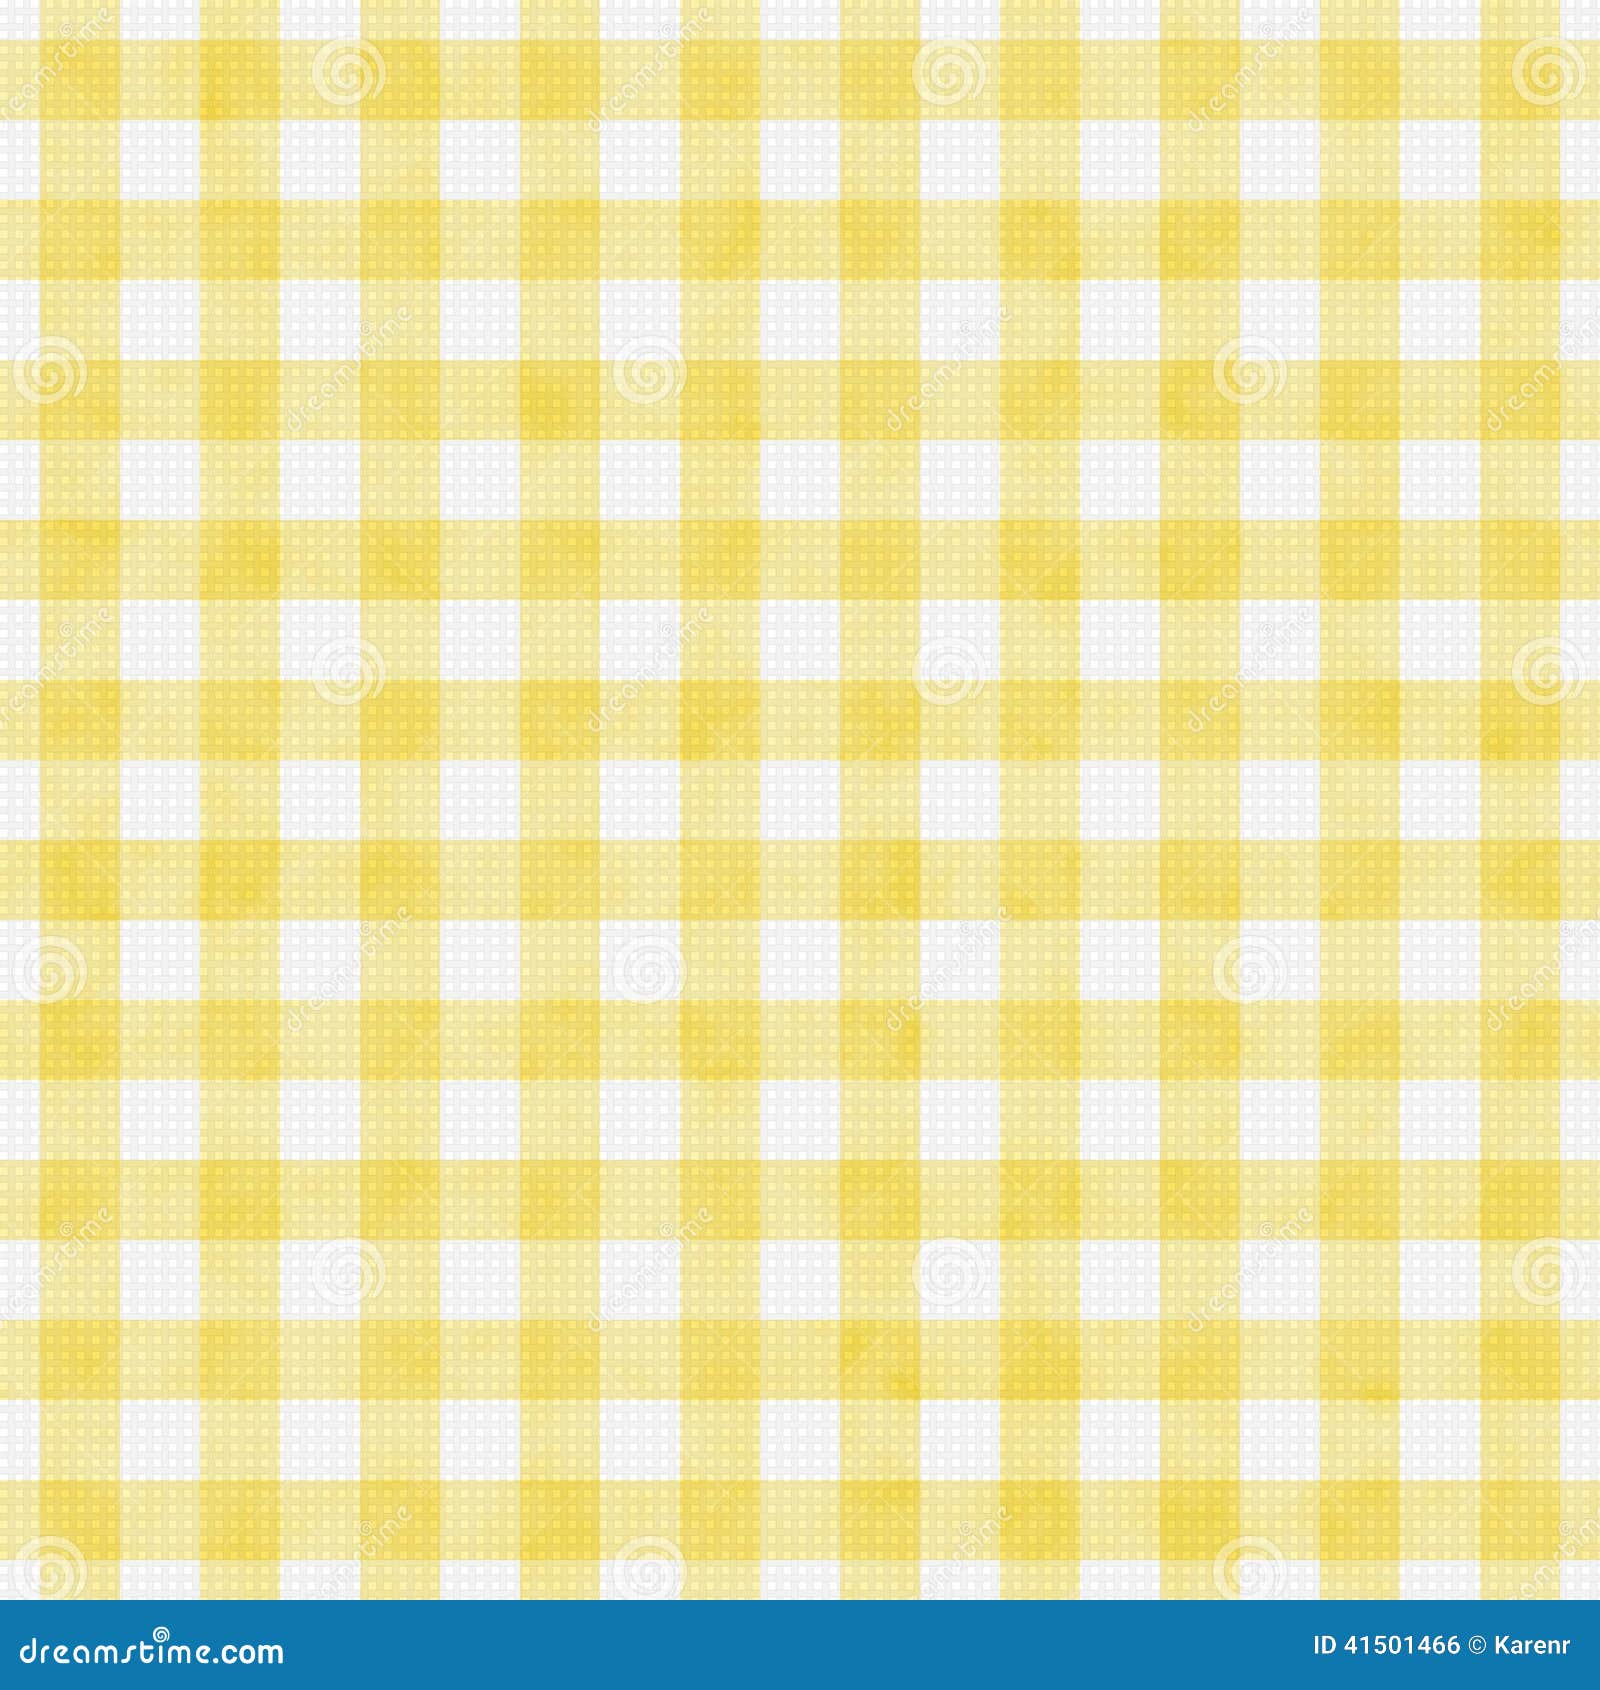 pale yellow gingham pattern repeat background